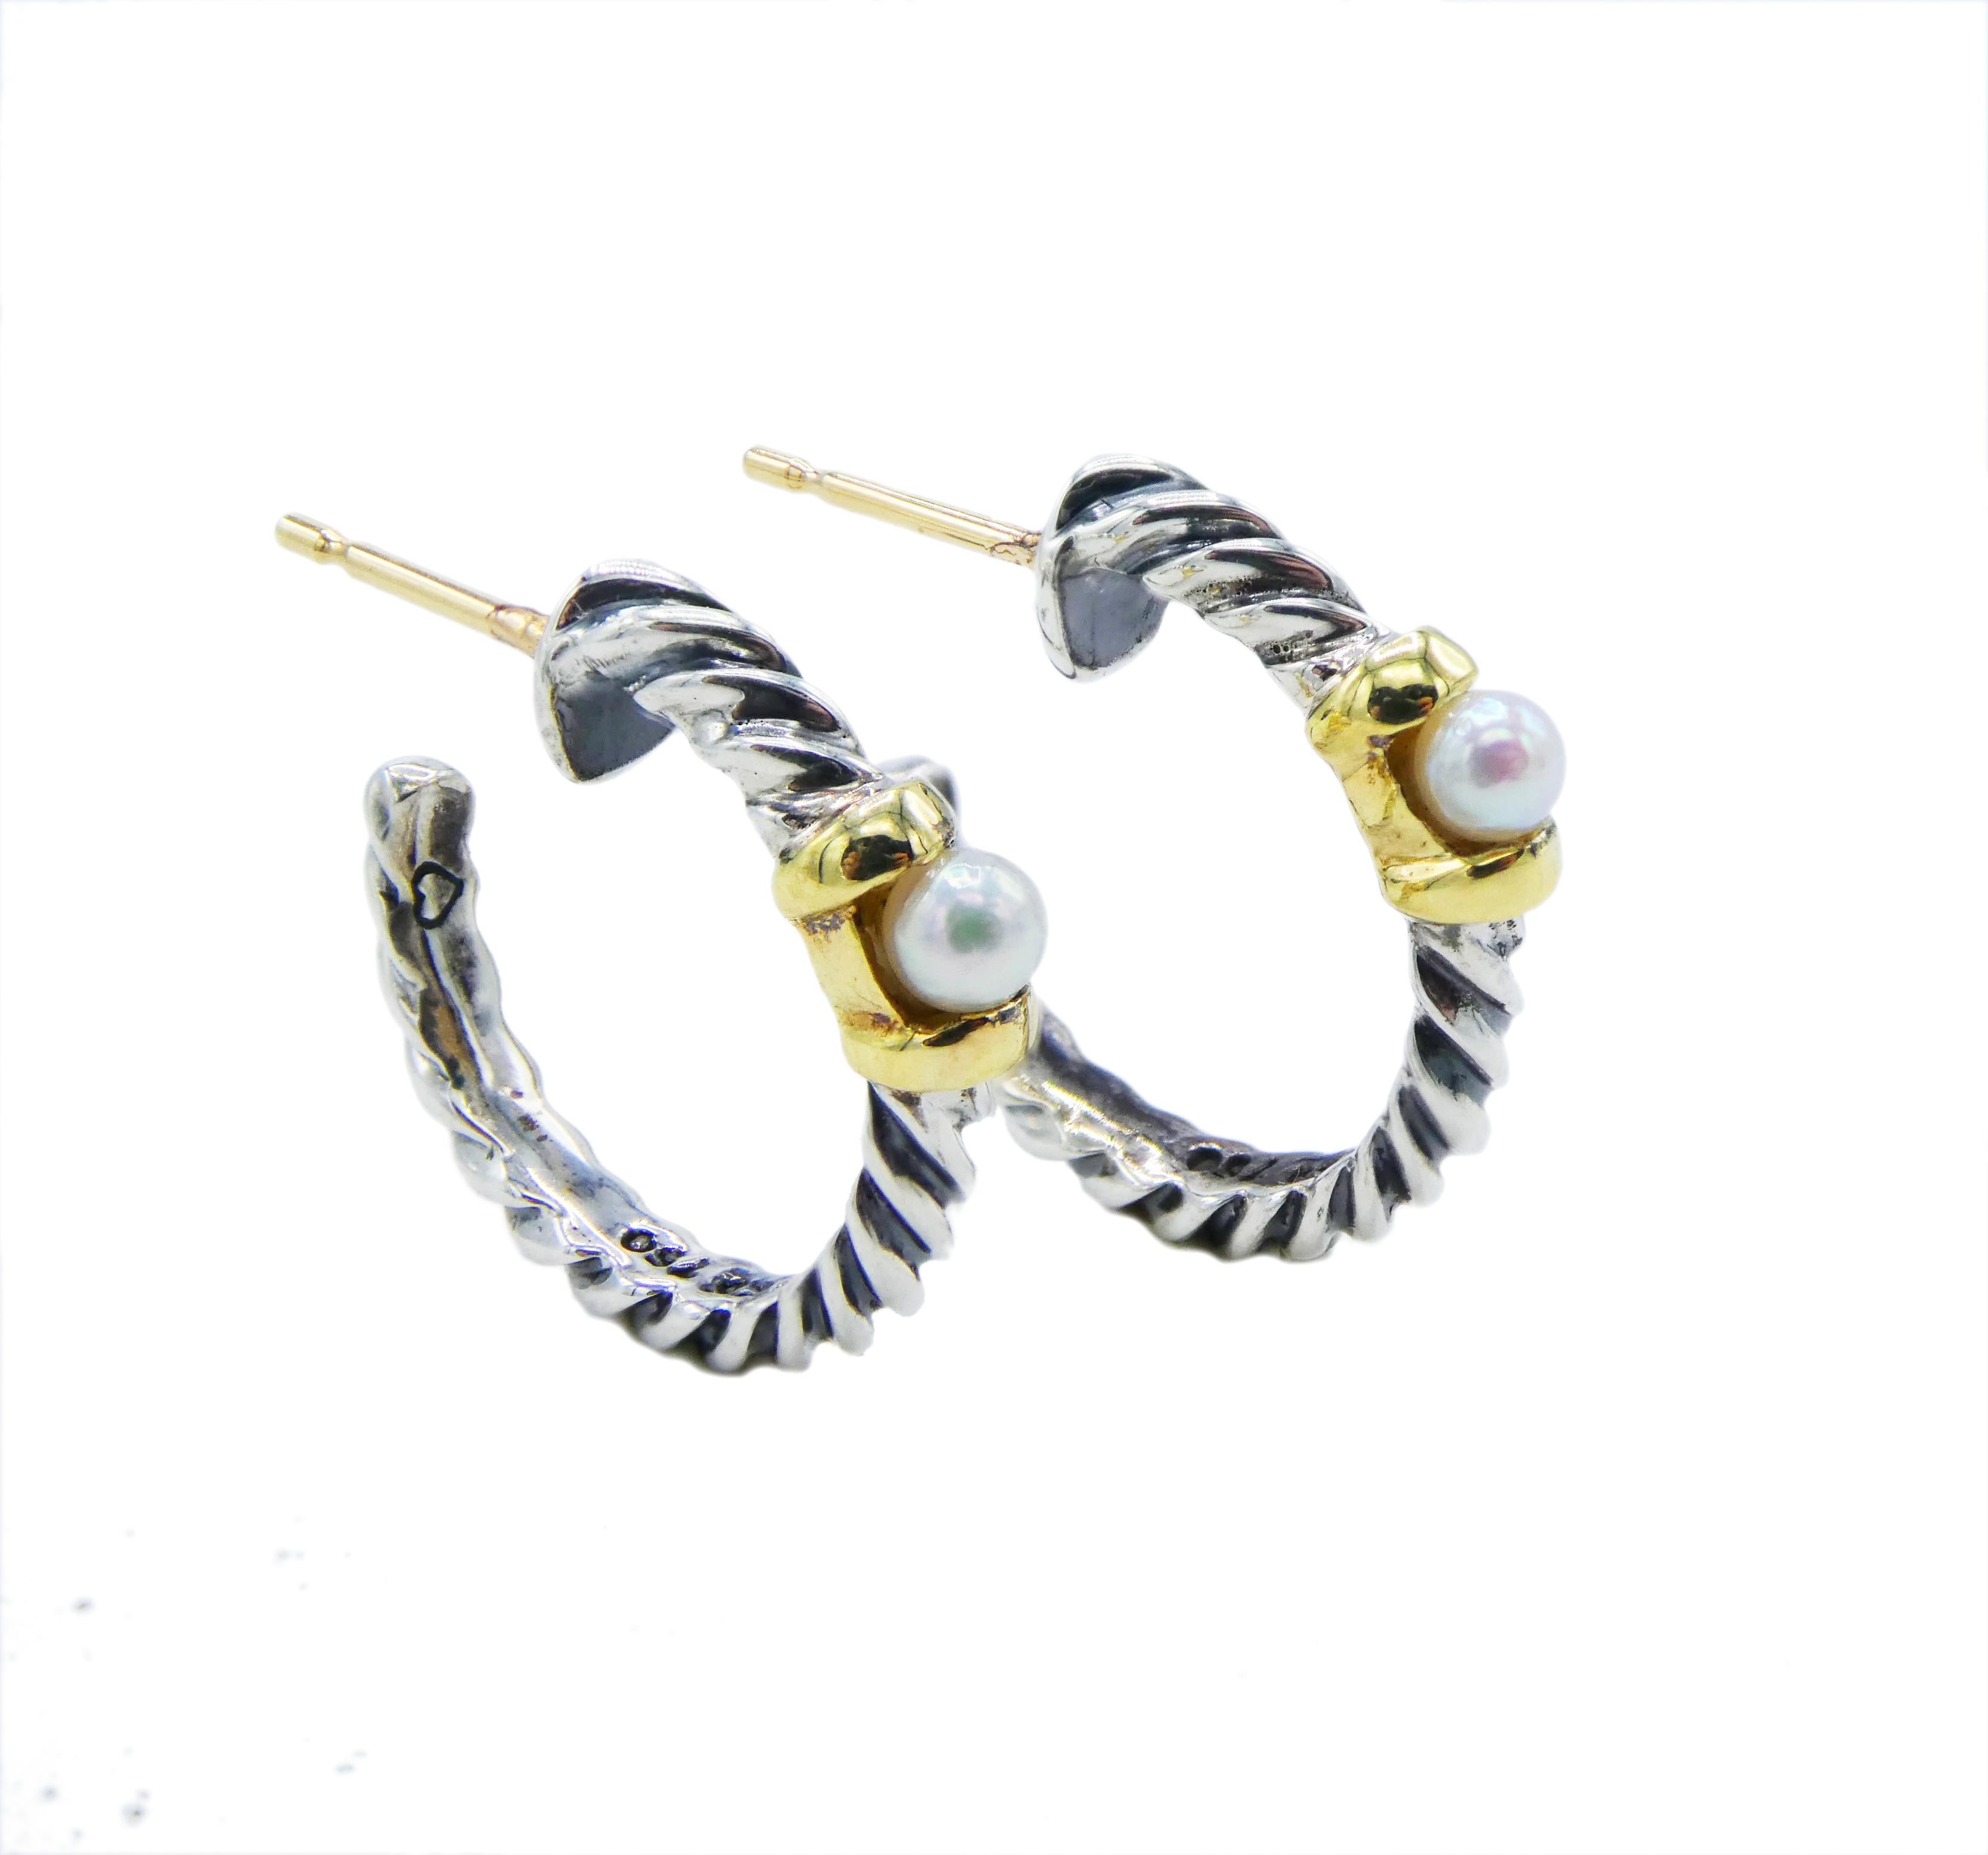 David Yurman Mini Hoop Cable Earrings Petite Pearl Sterling Silver 18 Karat Yellow Gold

Metal: Sterling silver 925, 18k Yellow Gold 750
Weight: 1.86 grams
Pearls: White cultured 2.3mm 
15mm in diameter
Signed: D.Y. 925 750
Recently polished